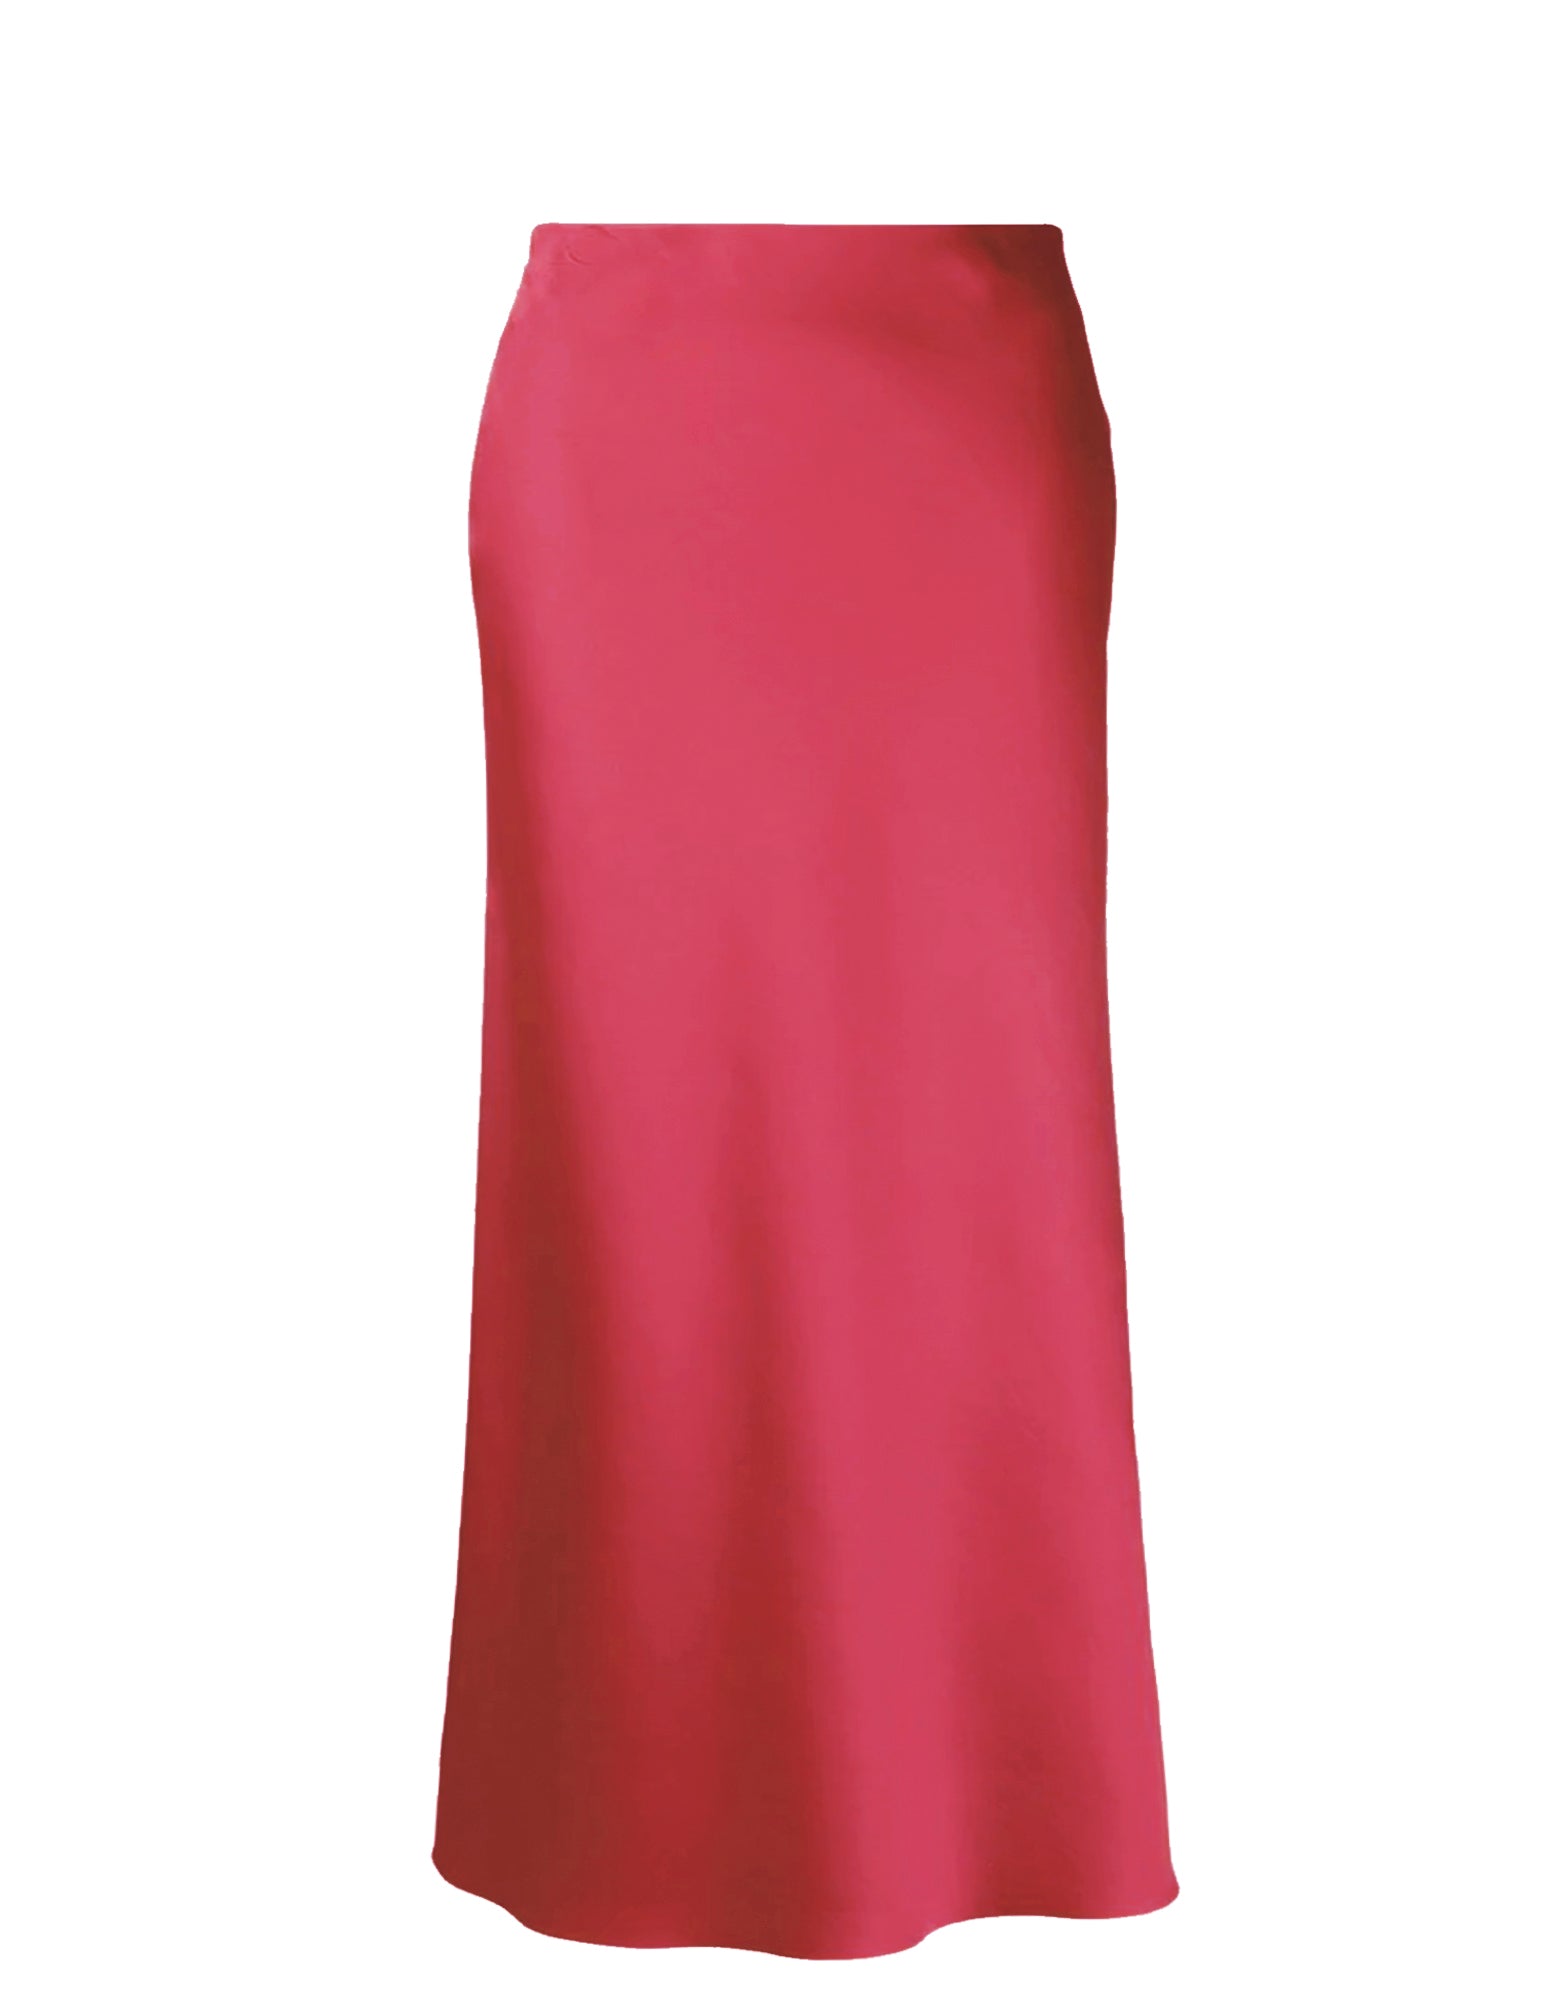 flat of coral skirt